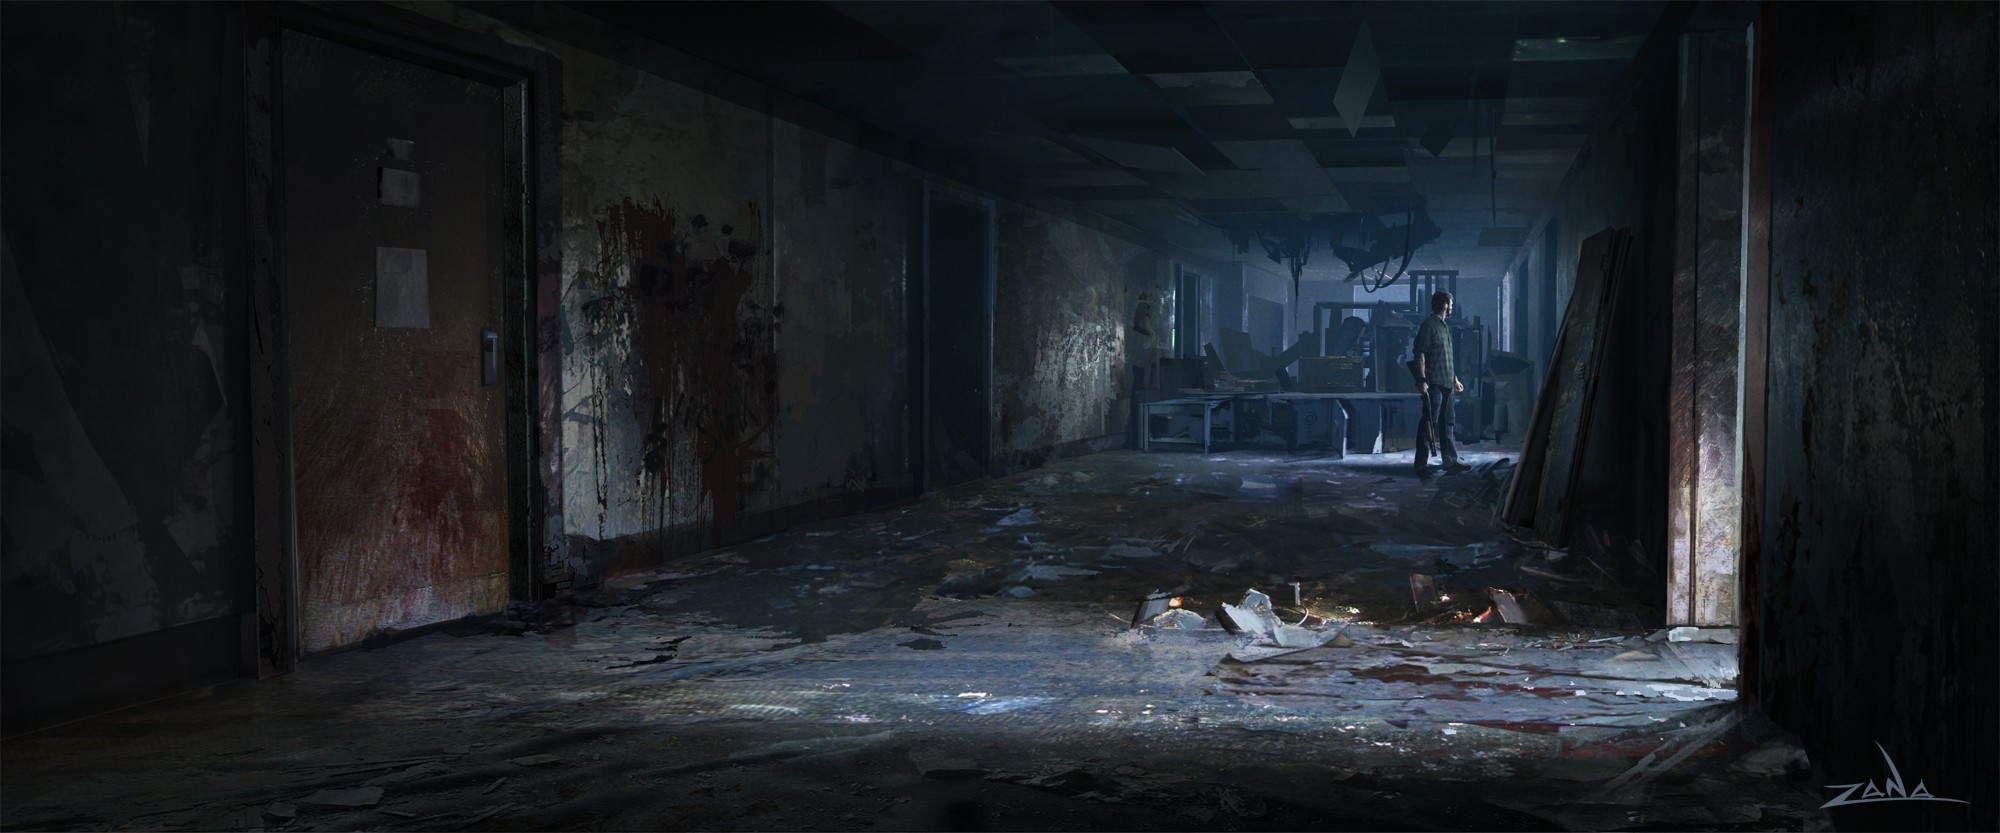 General 2000x833 The Last of Us concept art video games ruins video game art apocalyptic